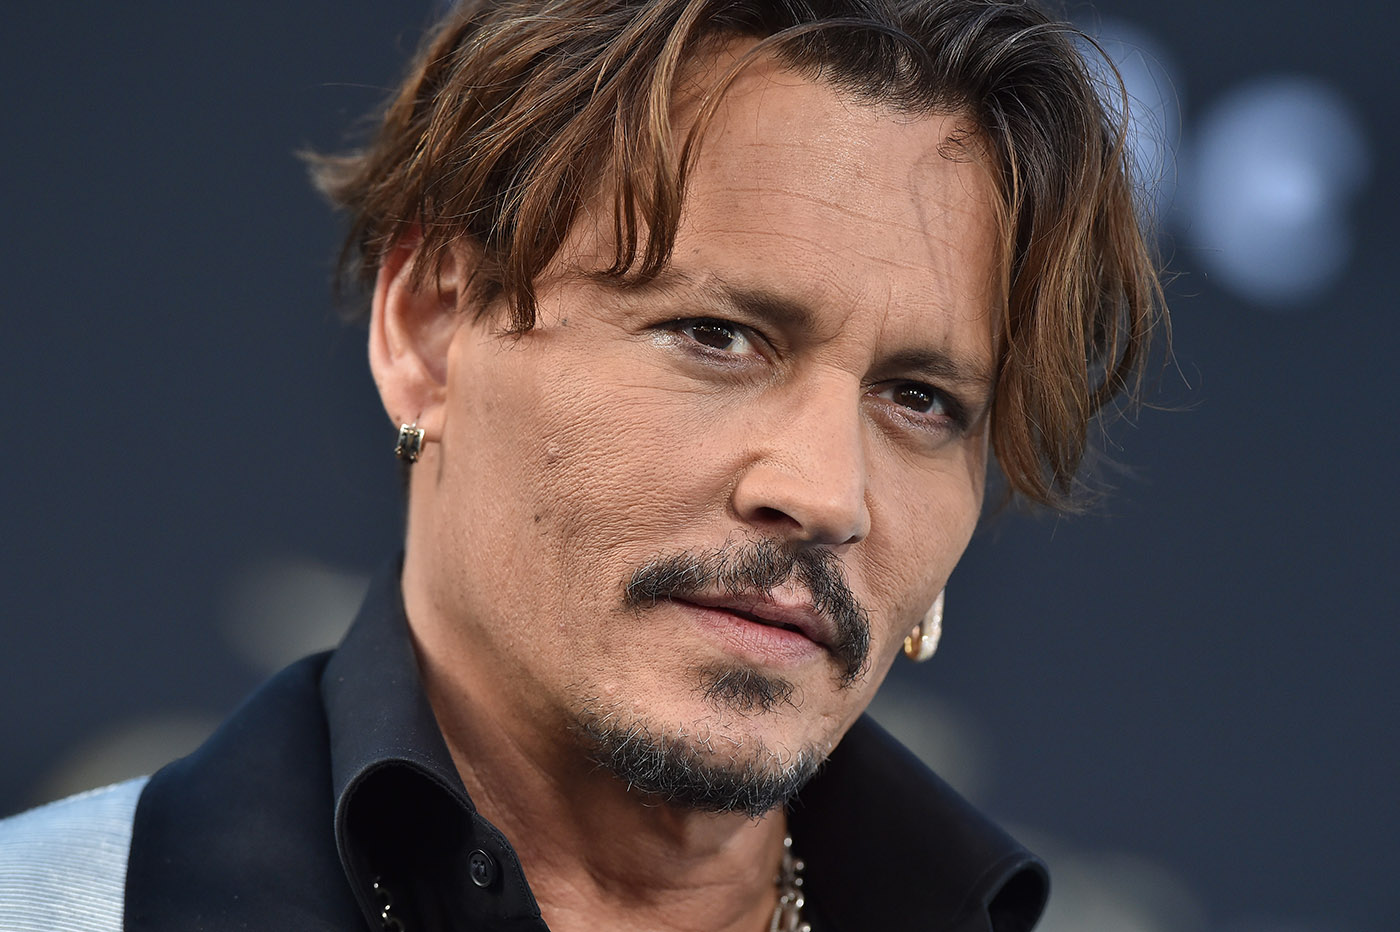 Fans Go Gaga As Johnny Depp Takes Stage Clean-shaven For Finland Show